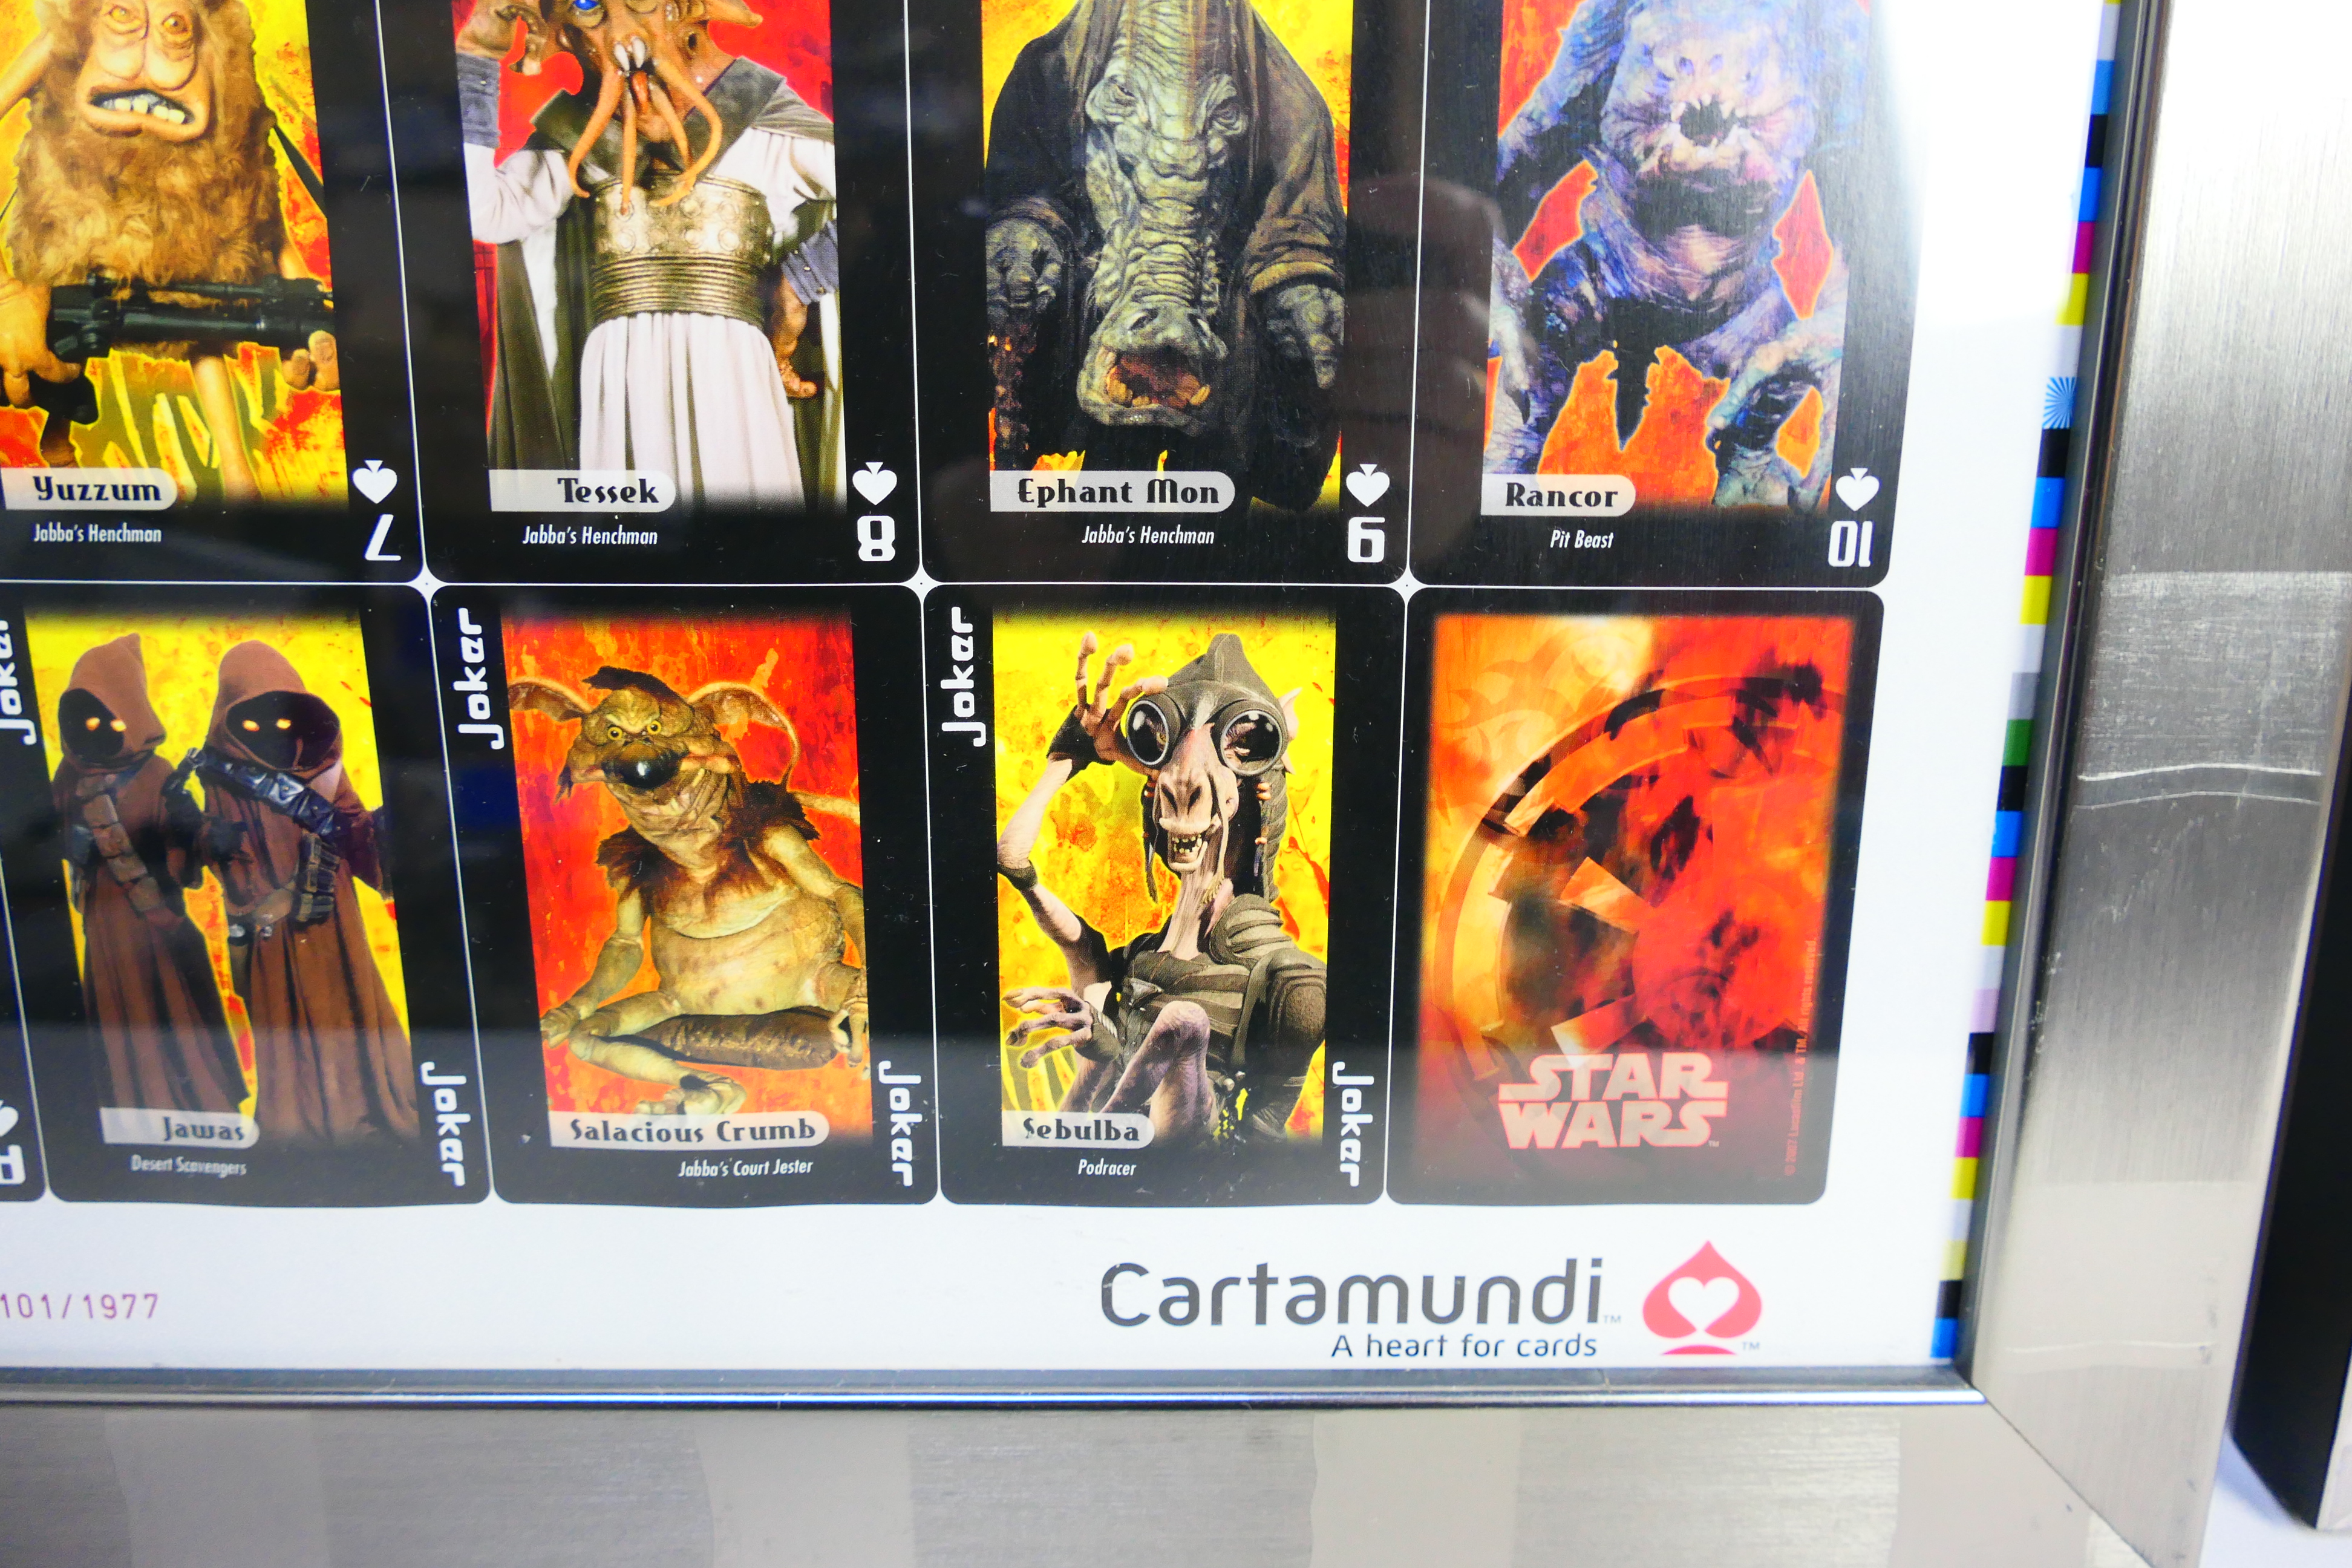 Star Wars - Two limited edition, framed display pieces of Cartamundi uncut playing card sheets, - Image 5 of 8